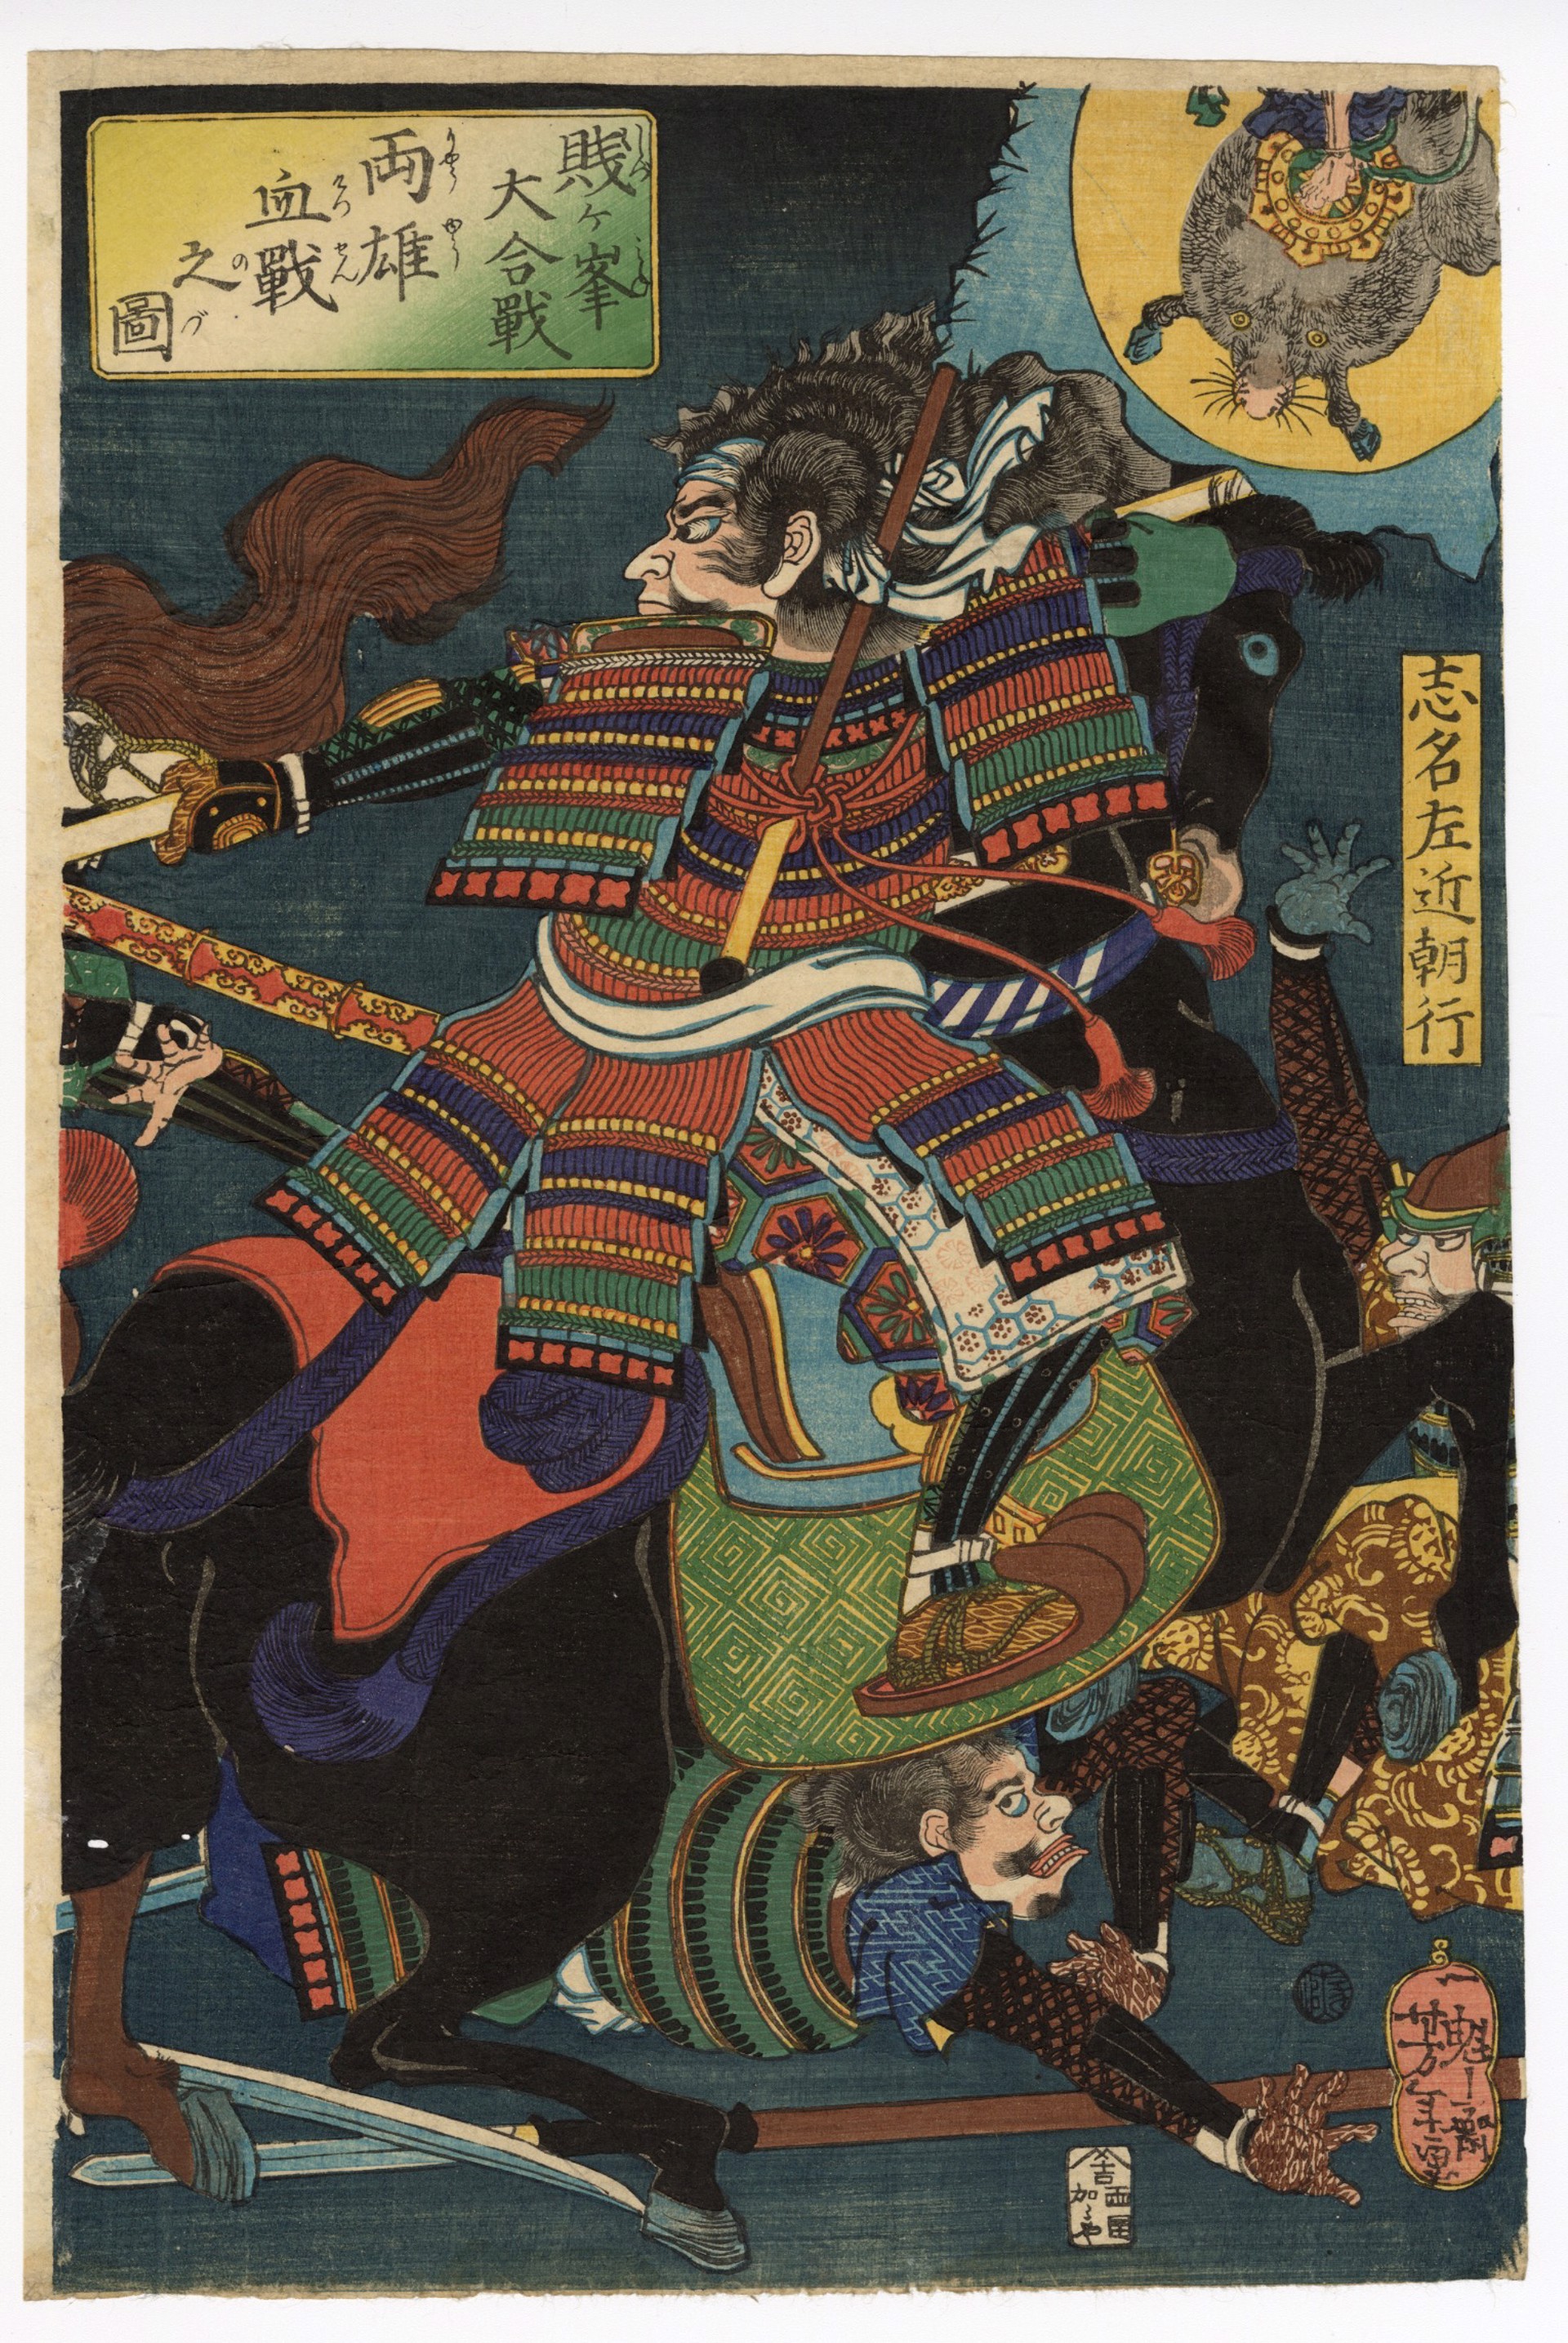 The Bloody Fight Betwee Two(2) Brave Warriors at the Great Battle of Shizugatake (1583) by Yoshitoshi